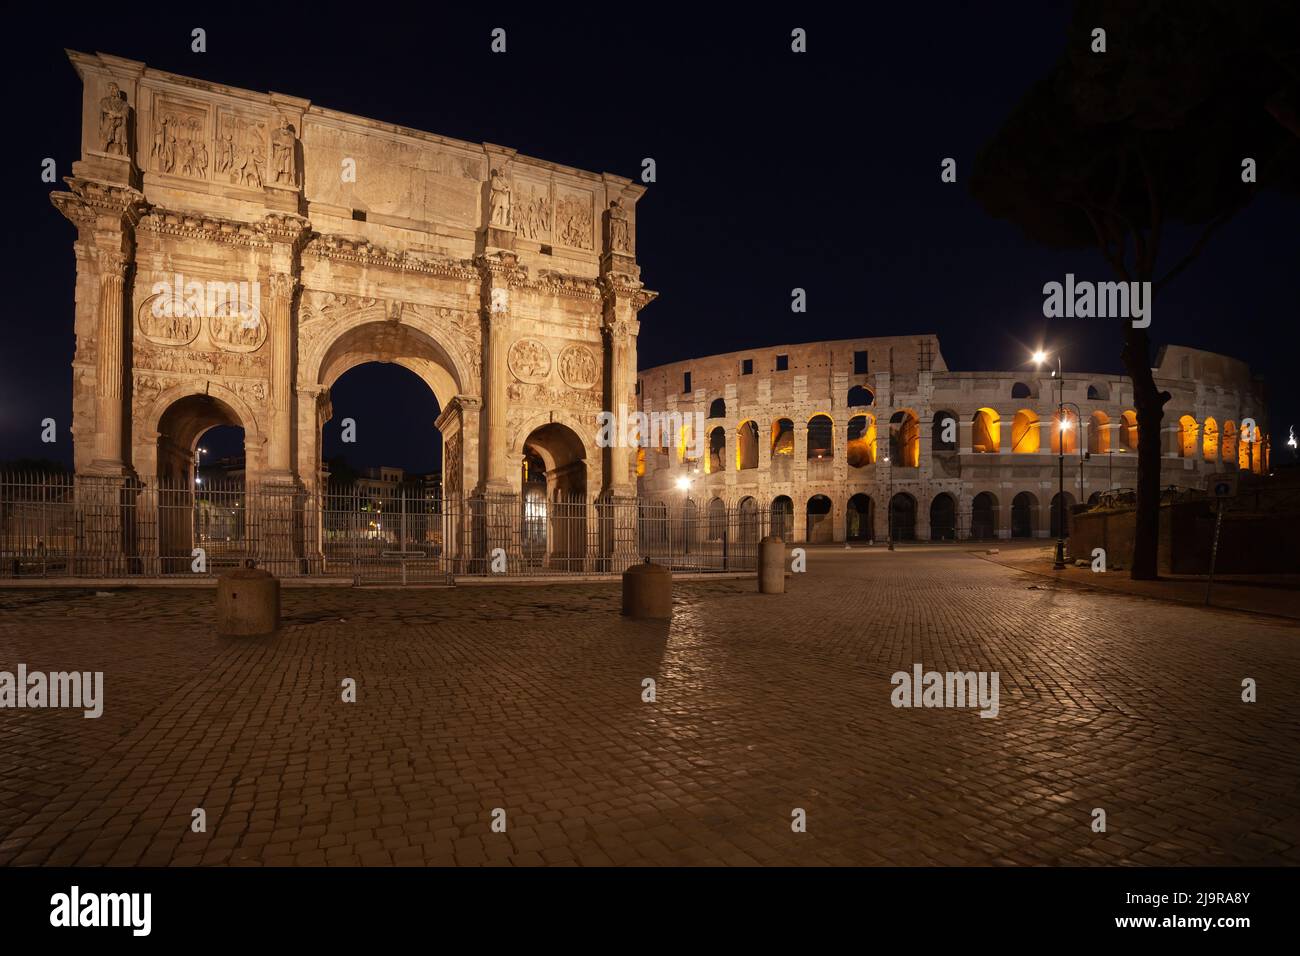 The Arch of Constantine and the Colosseum at night in city of Rome, Italy. View from Piazza del Arco di Costantino square. Stock Photo